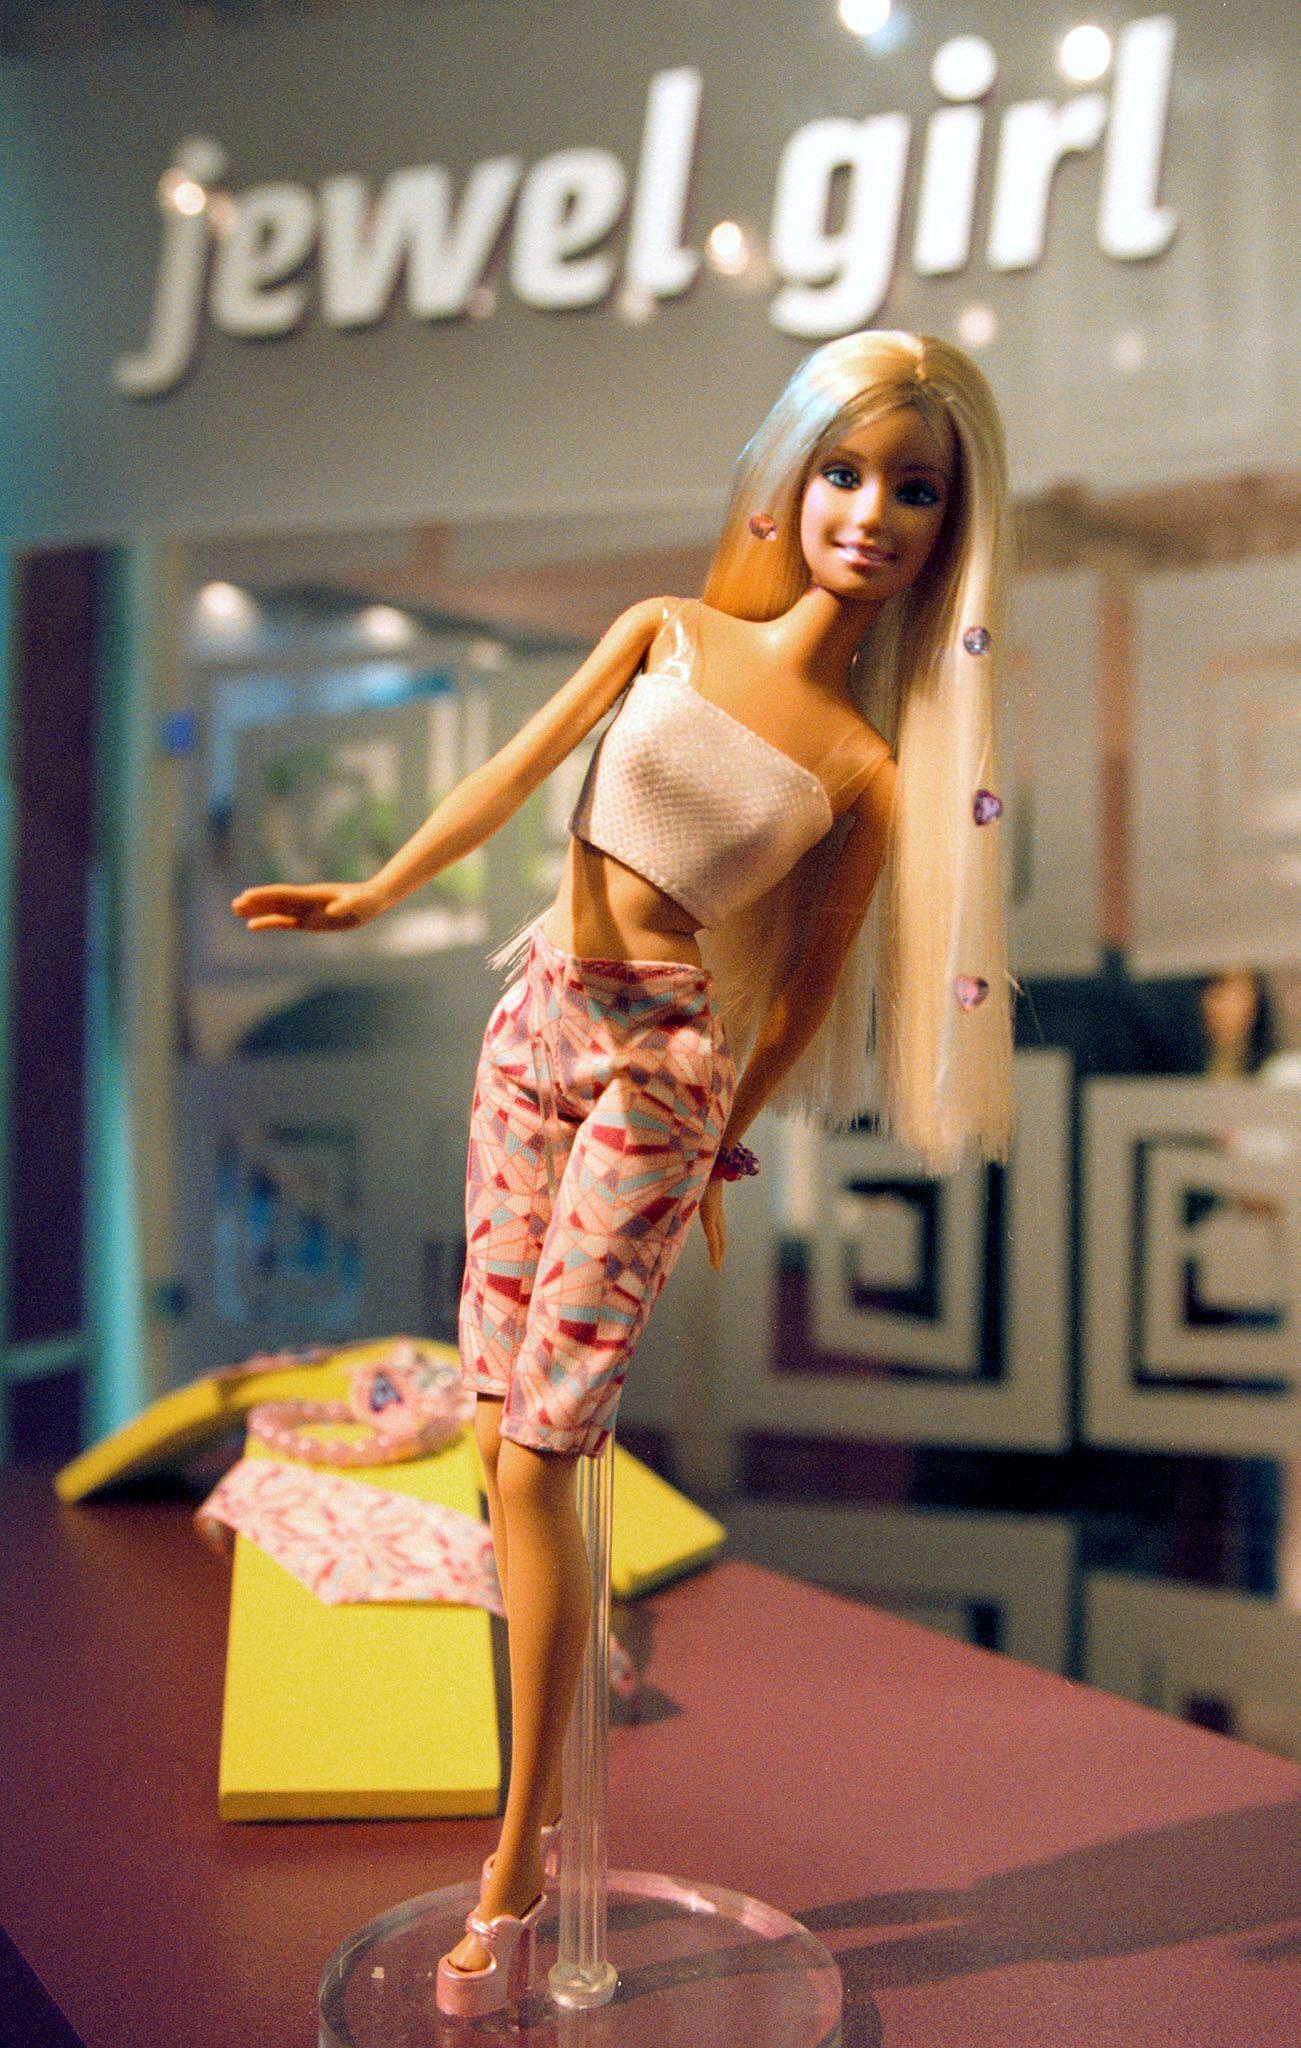 Jewel Girl Barbie is displayed by Mattel at the American International Toy Fair in New York on Feb. 14, 2000. The doll came with a flexible waist area allowing it to bend in any direction.